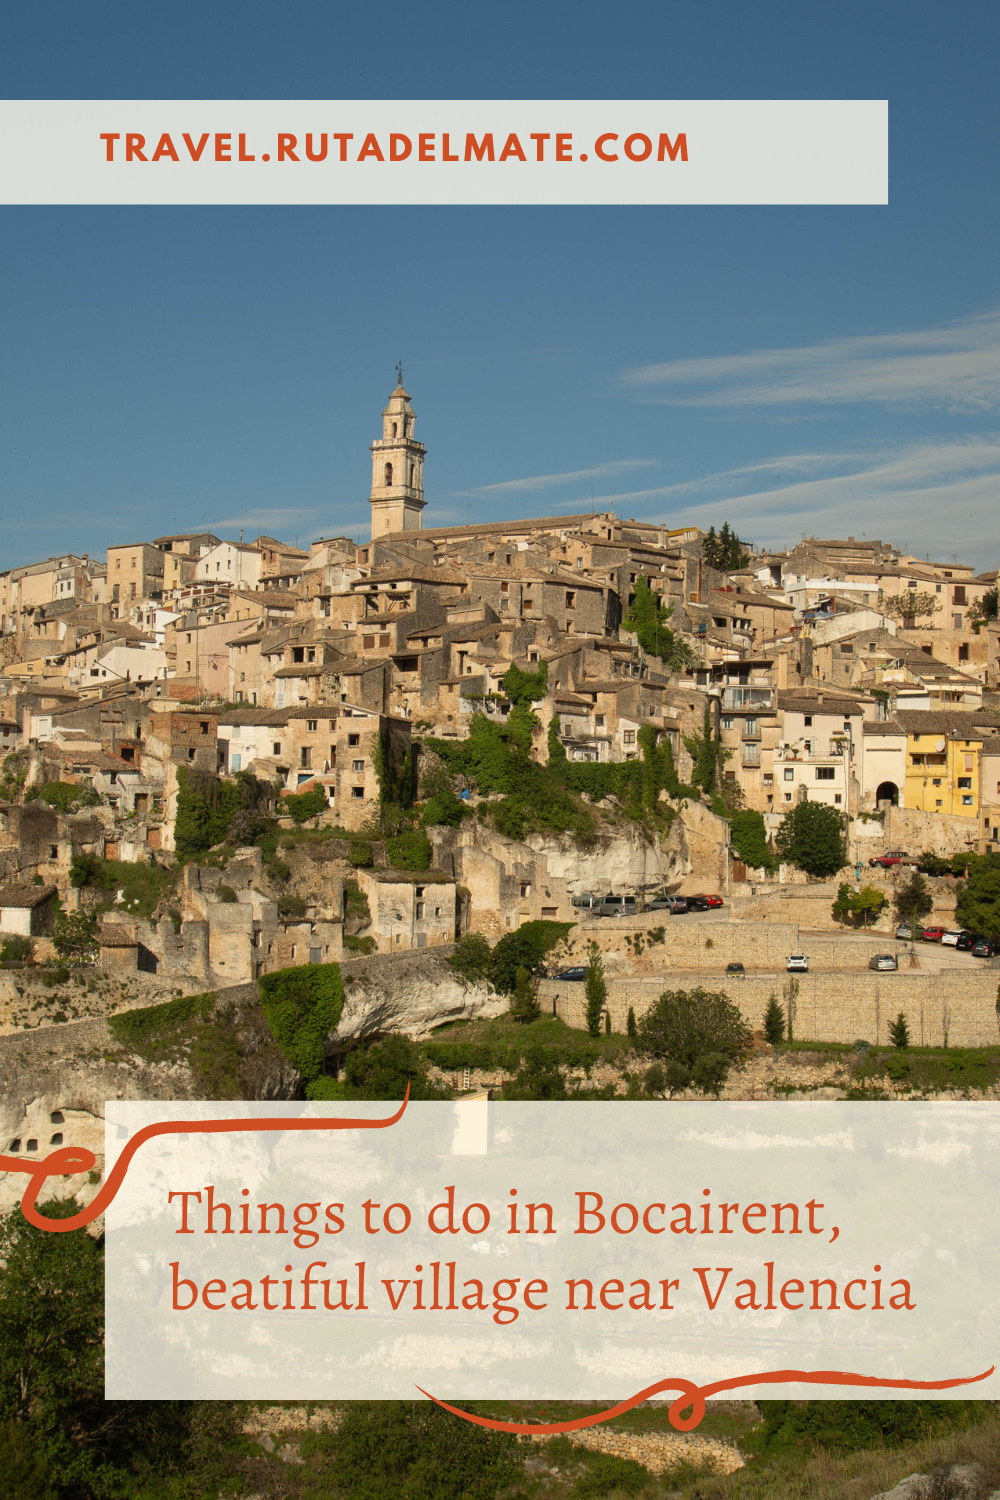 Things to do in Bocairent in one day